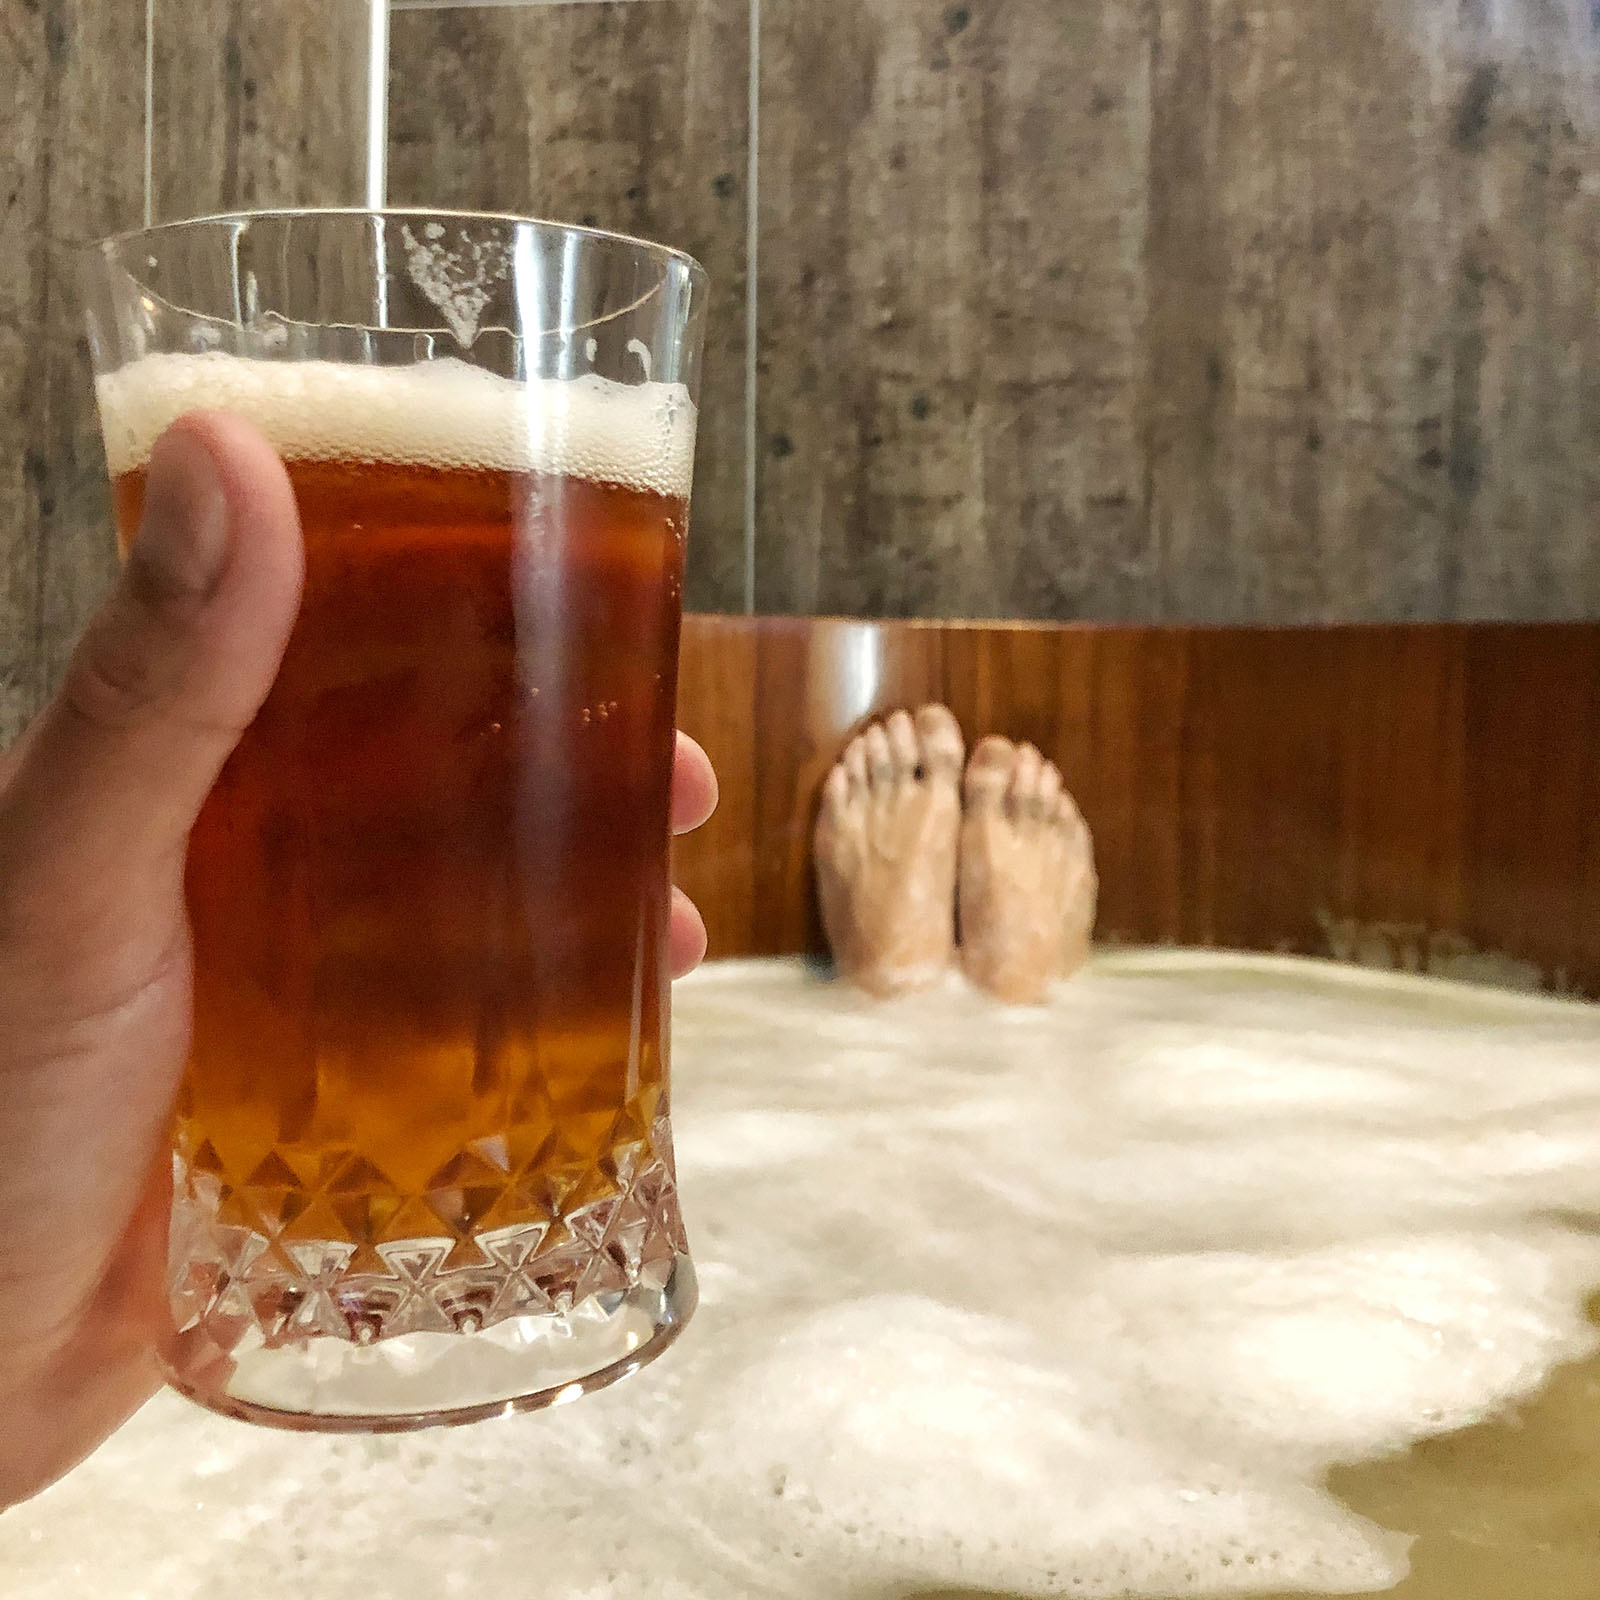 Pictured: Tim in a beer bath with his feet show and him holding a beer.